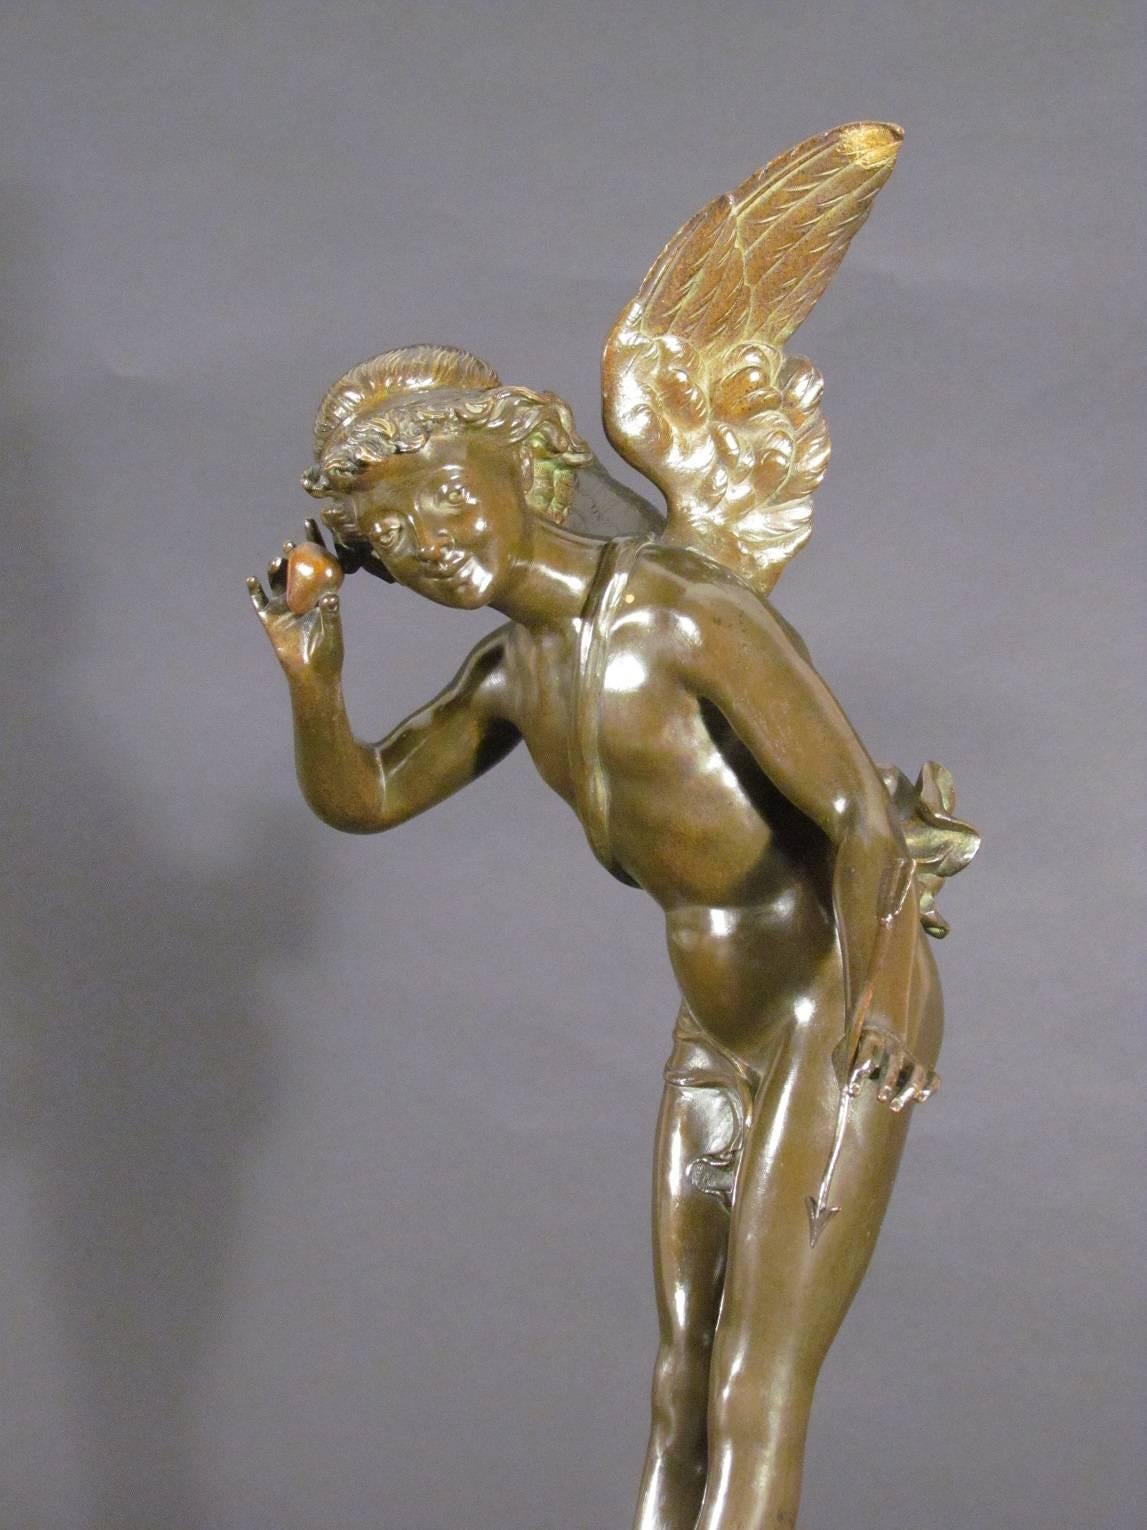 Antique french bronze sculpture of Cupid with heart.

Il Bat   Circa 1885    Height: 20 